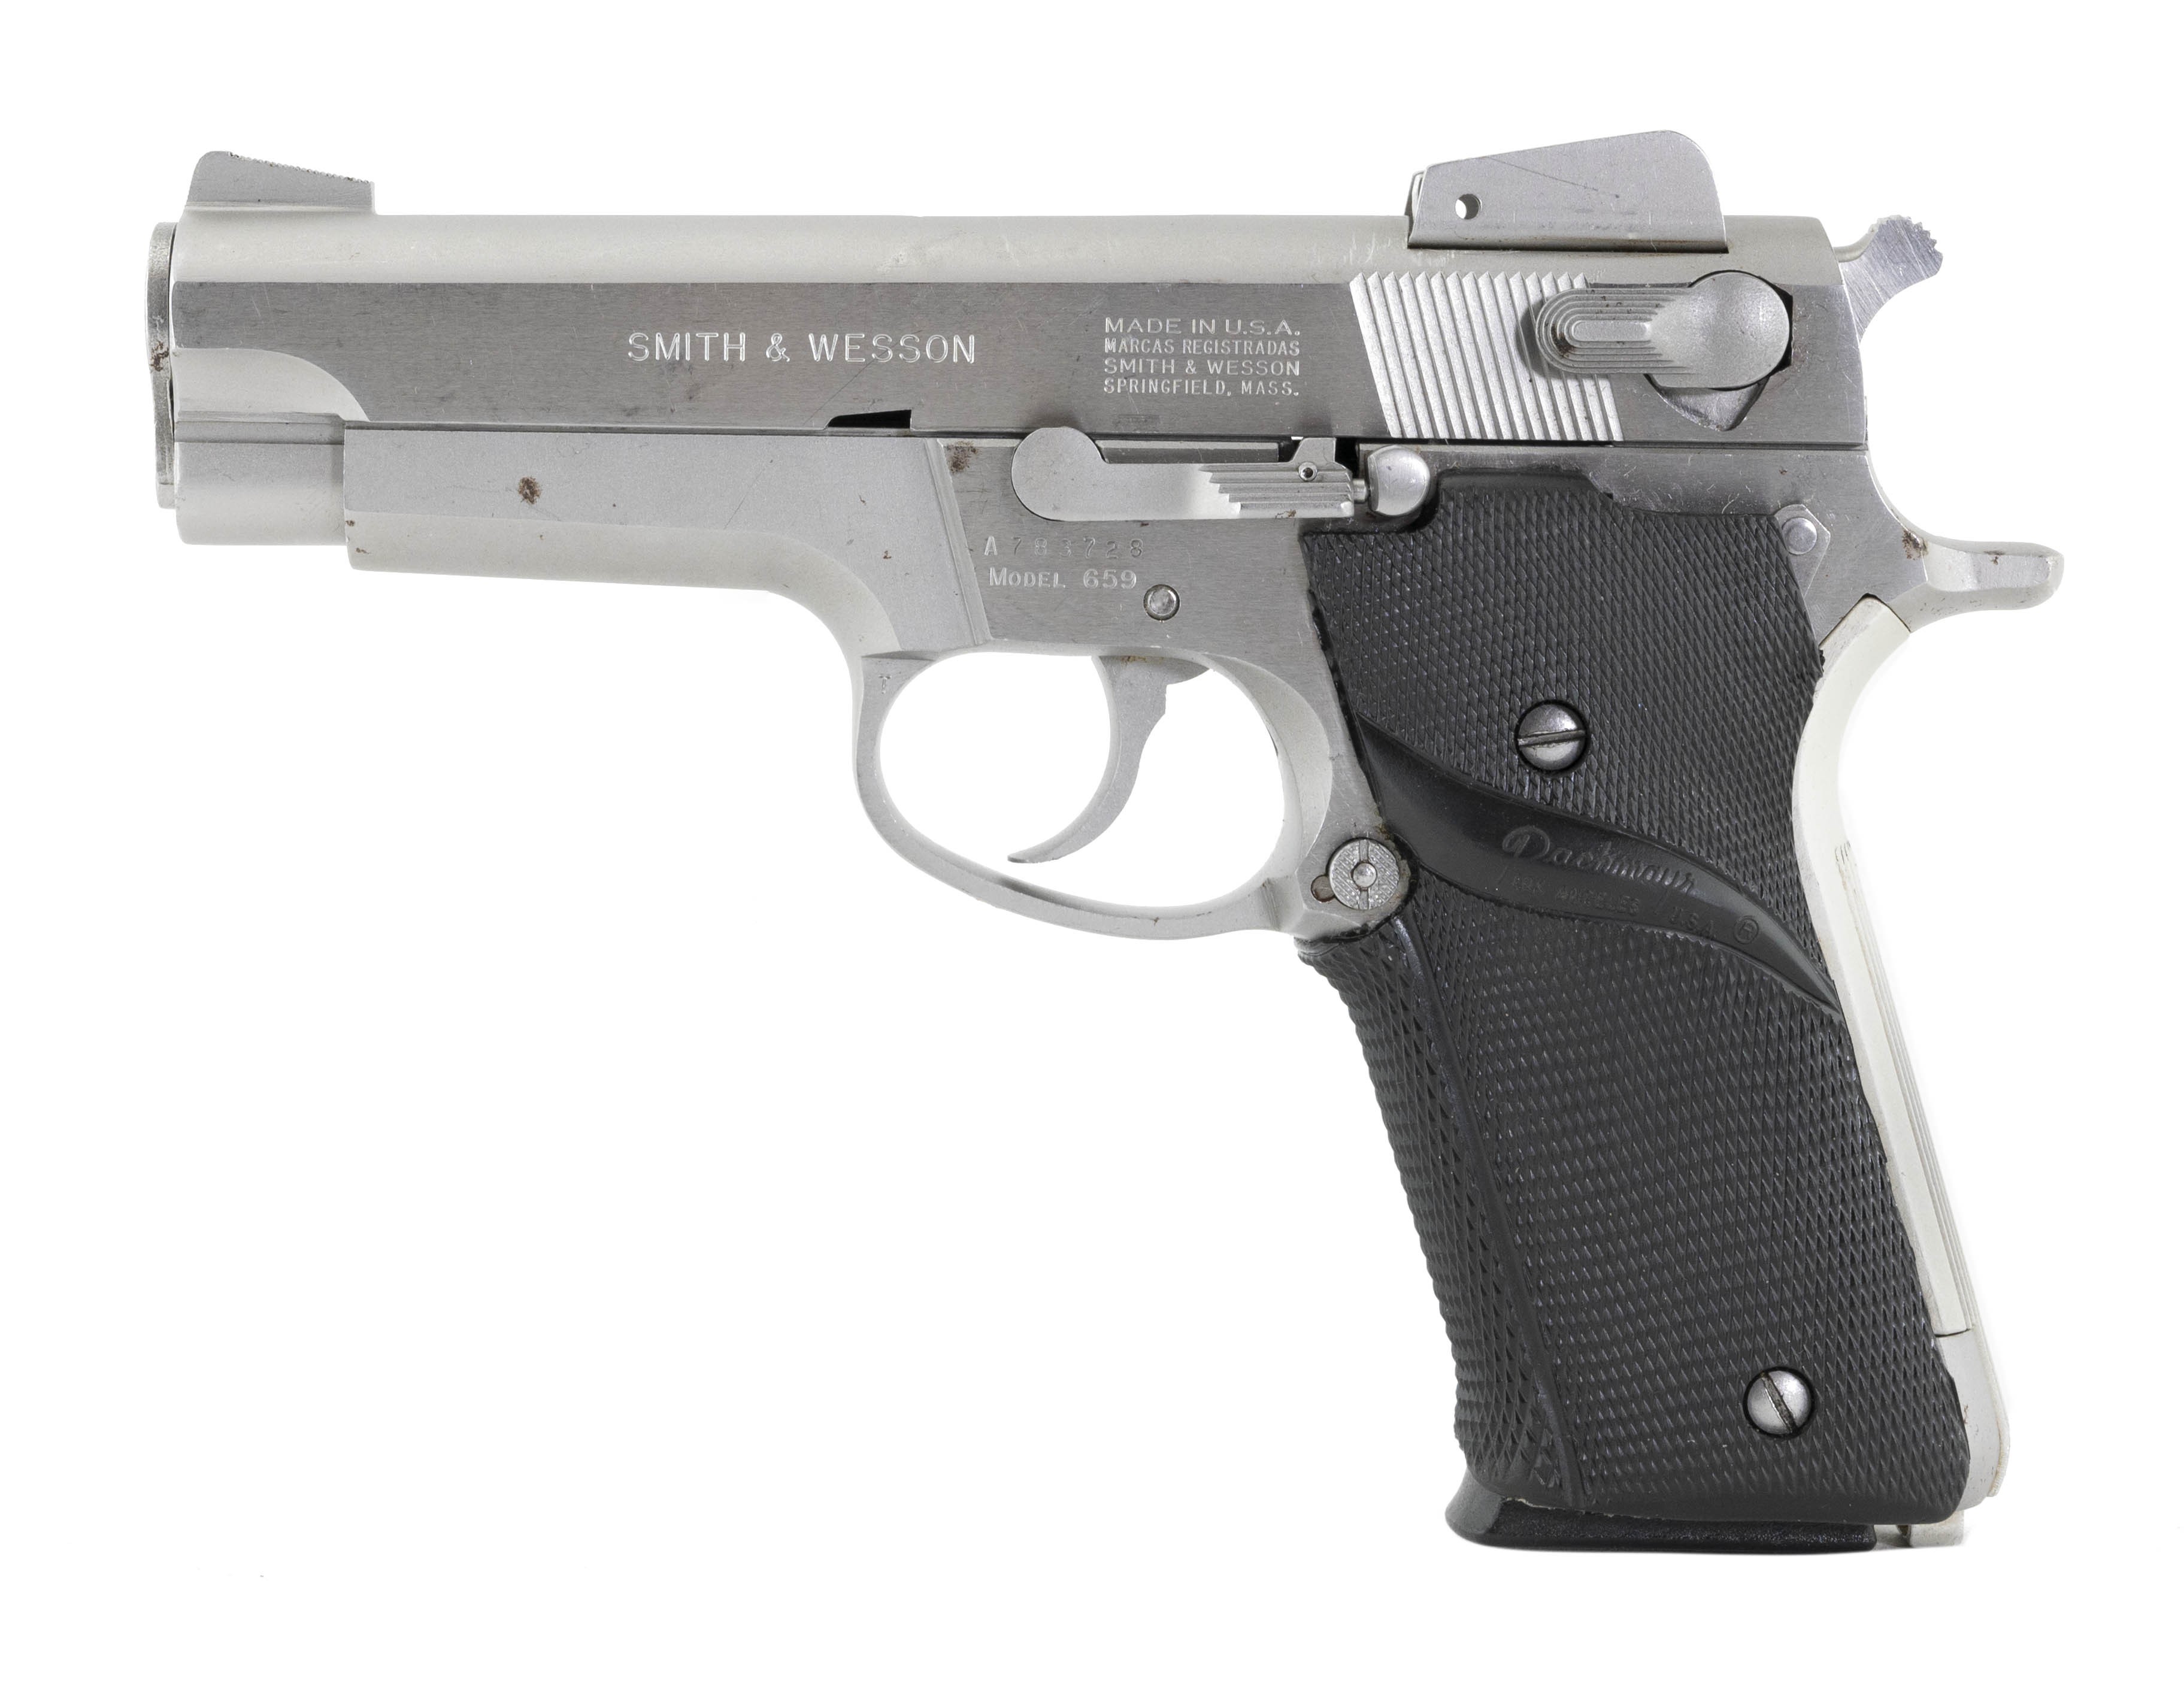 Smith Wesson 659 9mm Caliber Pistol For Sale 